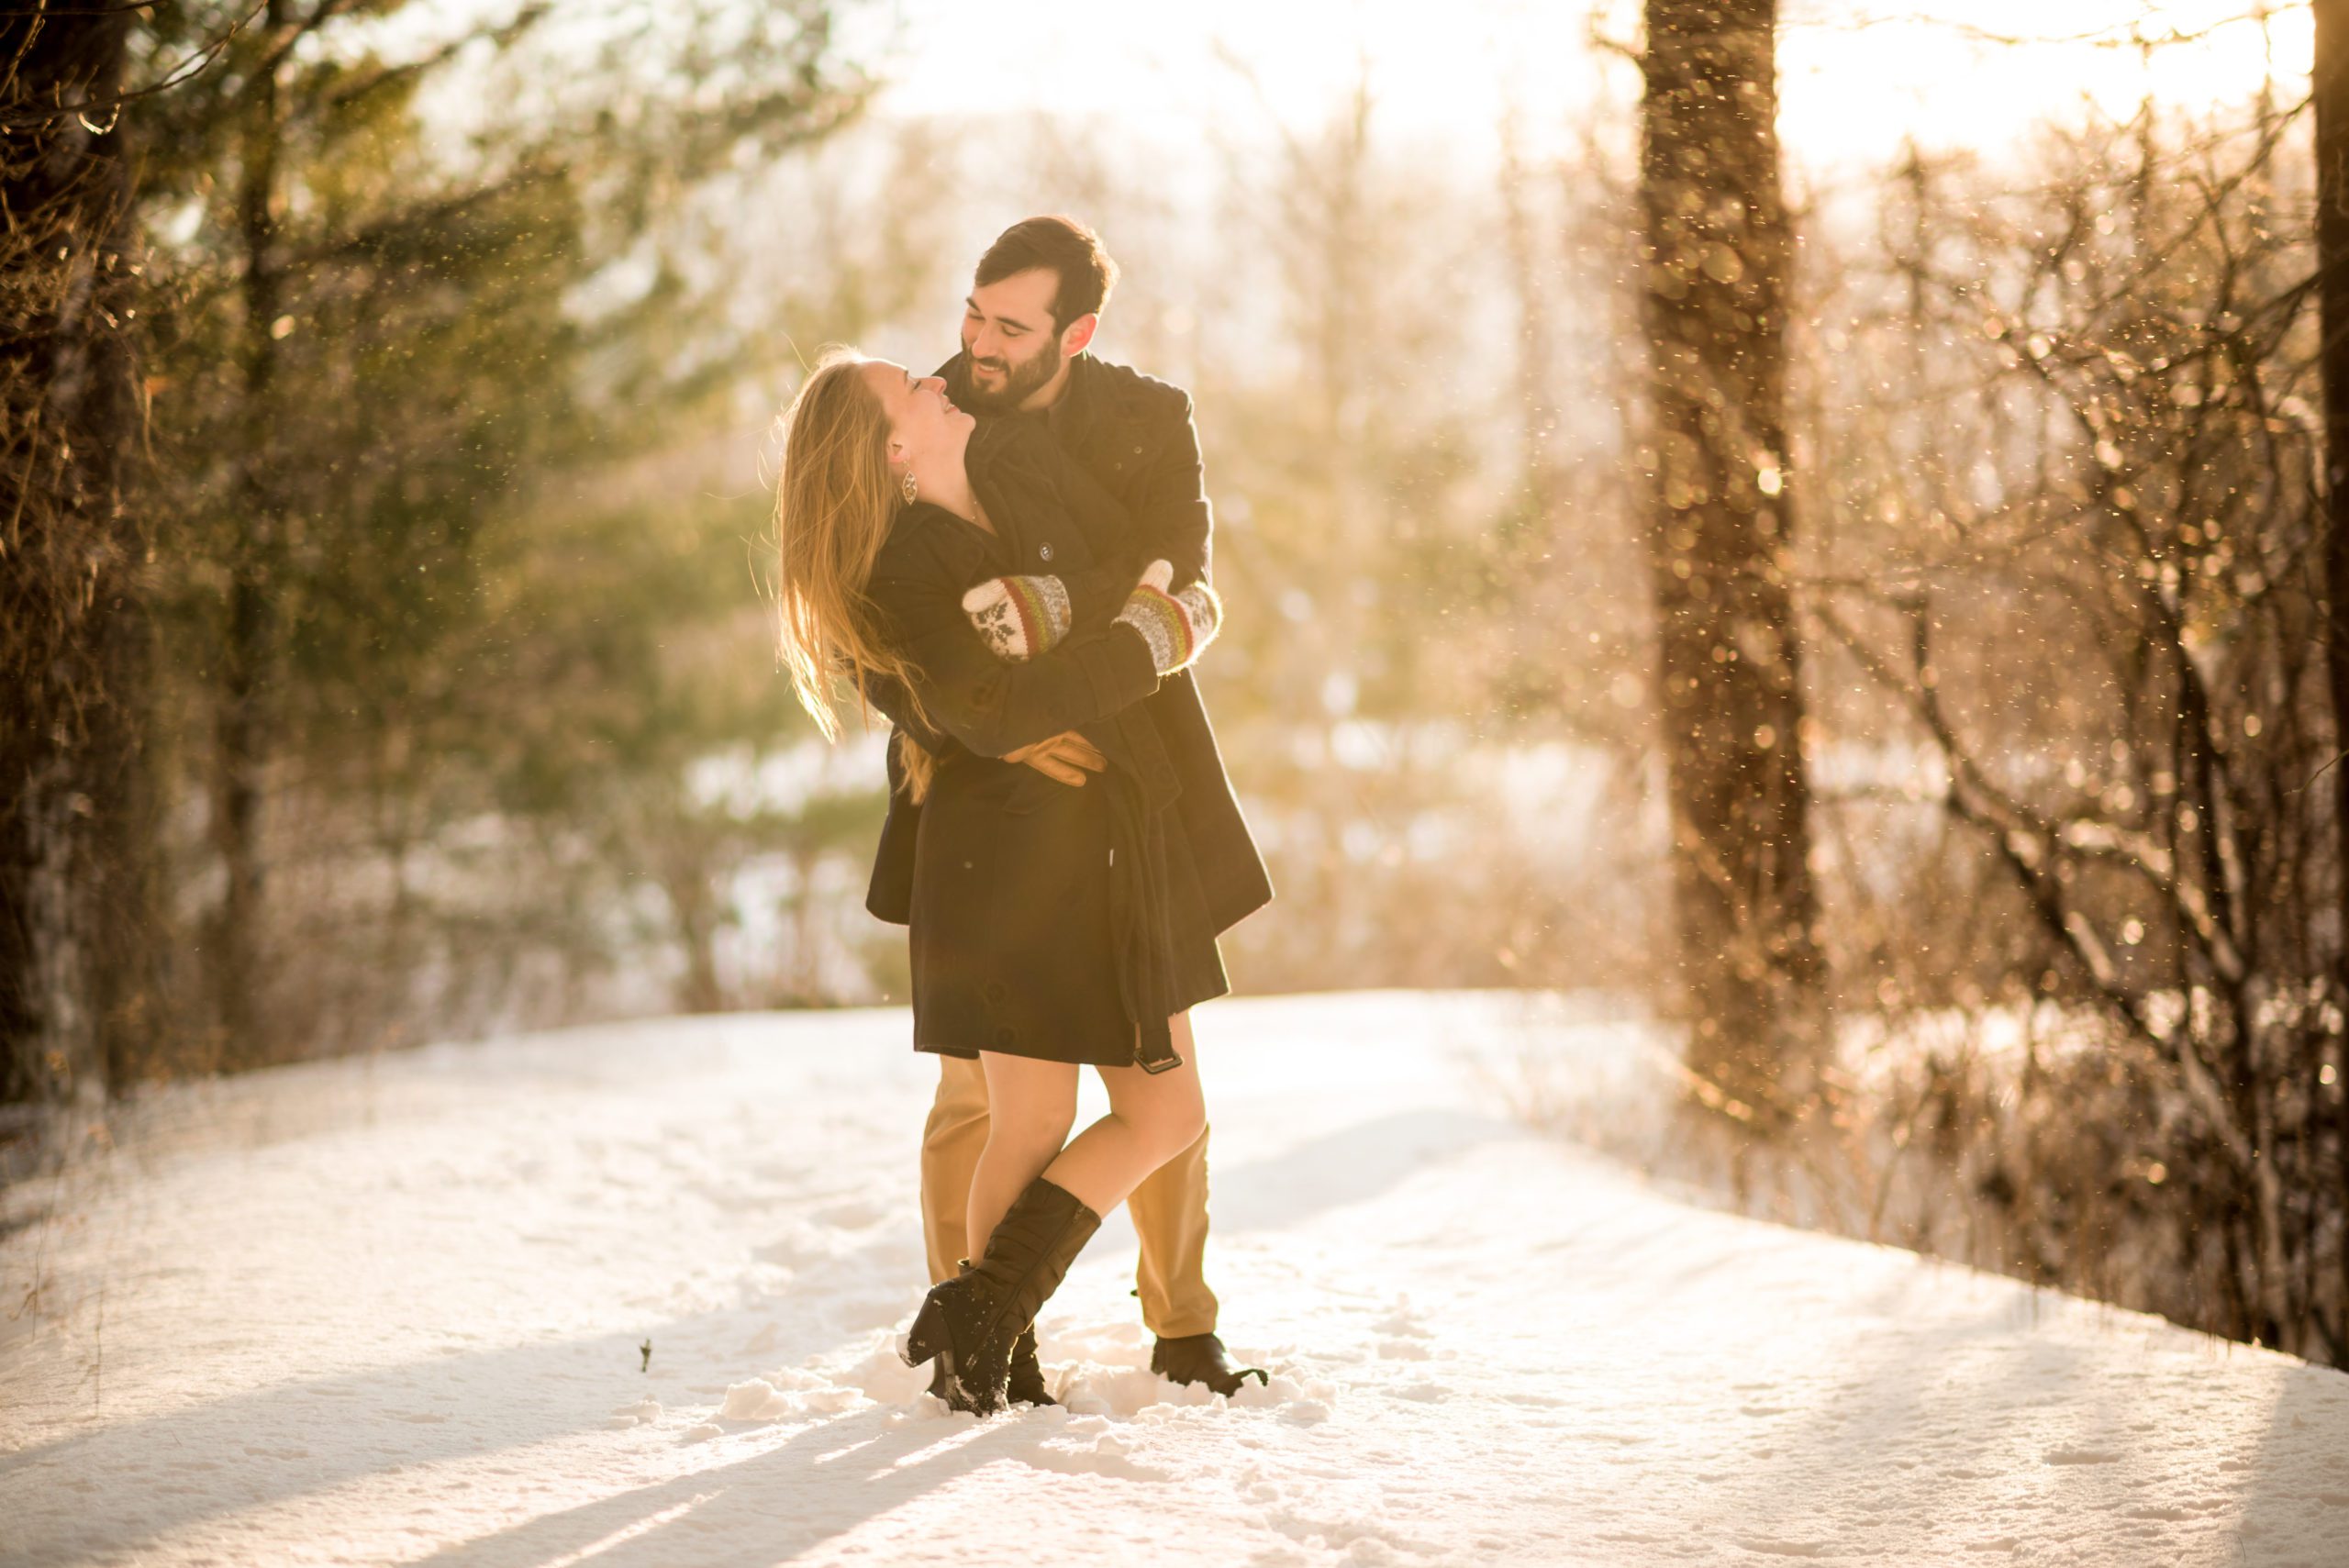 How to plan for a winter photo session